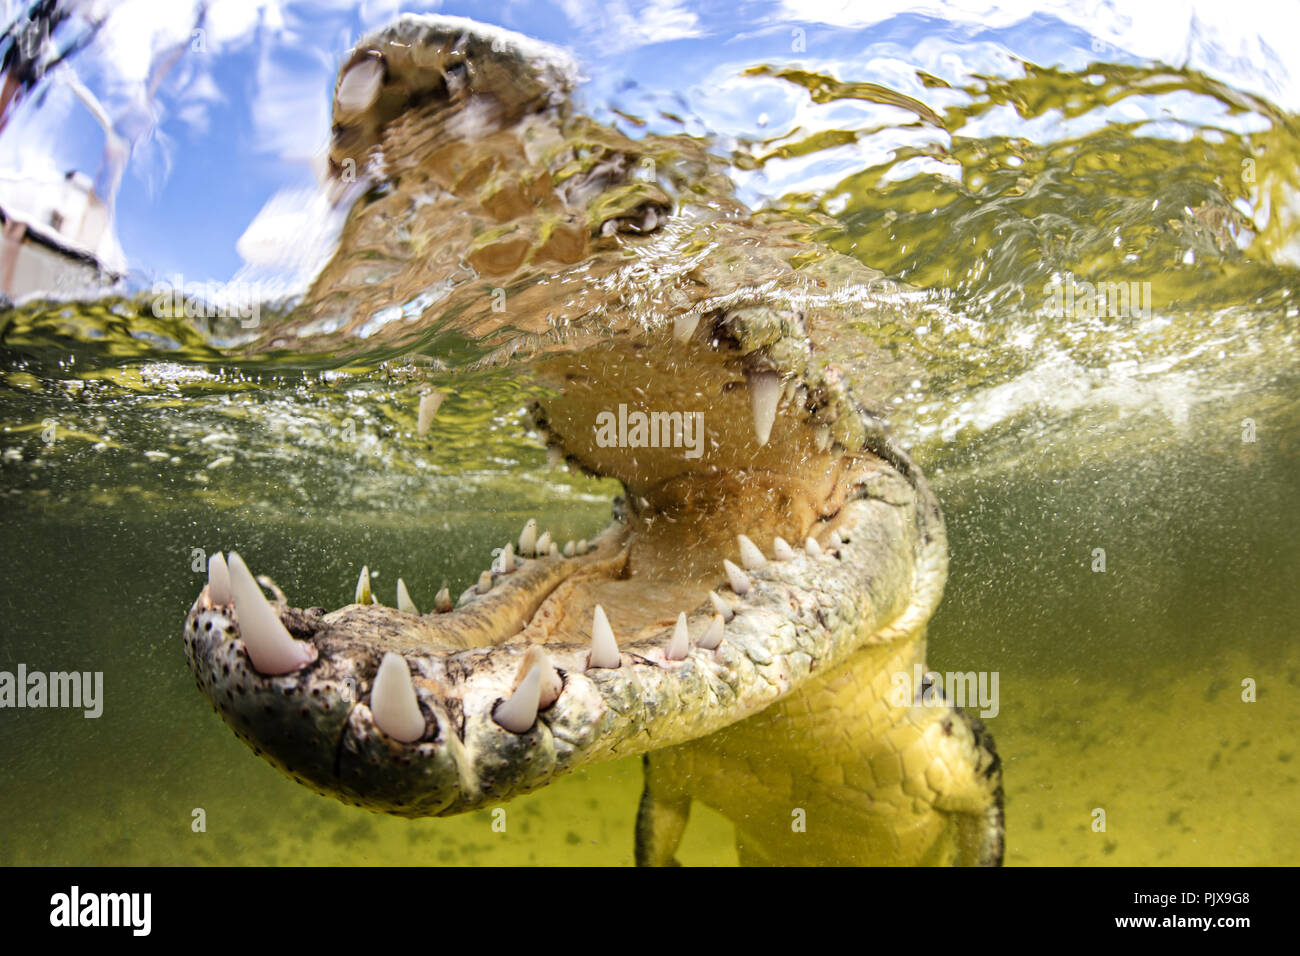 American saltwater crocodile with jaws open, Chinchorro Banks, Mexico Stock Photo